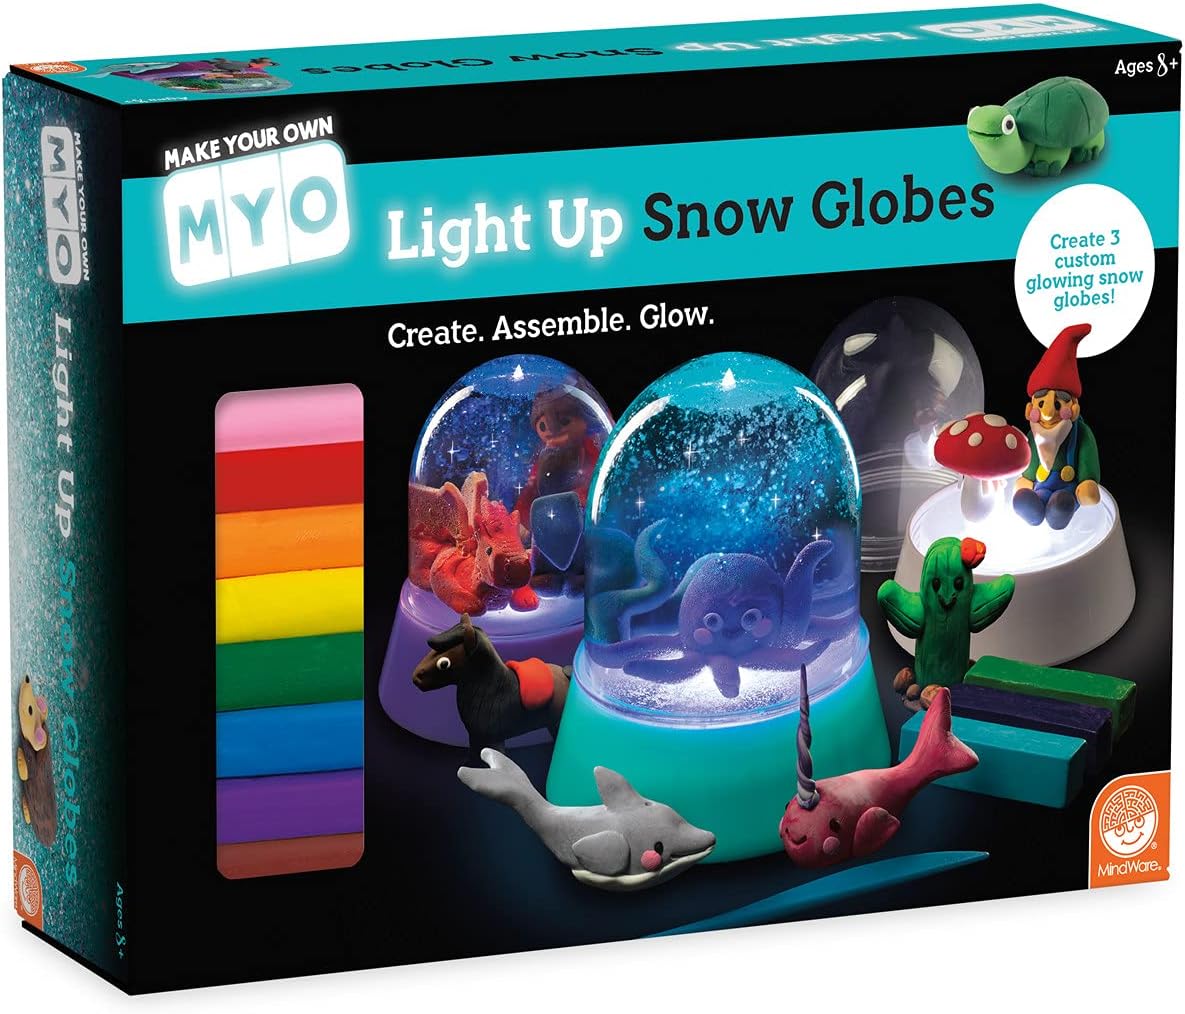 Make Your Own Glitter Snow Globes, MindWare